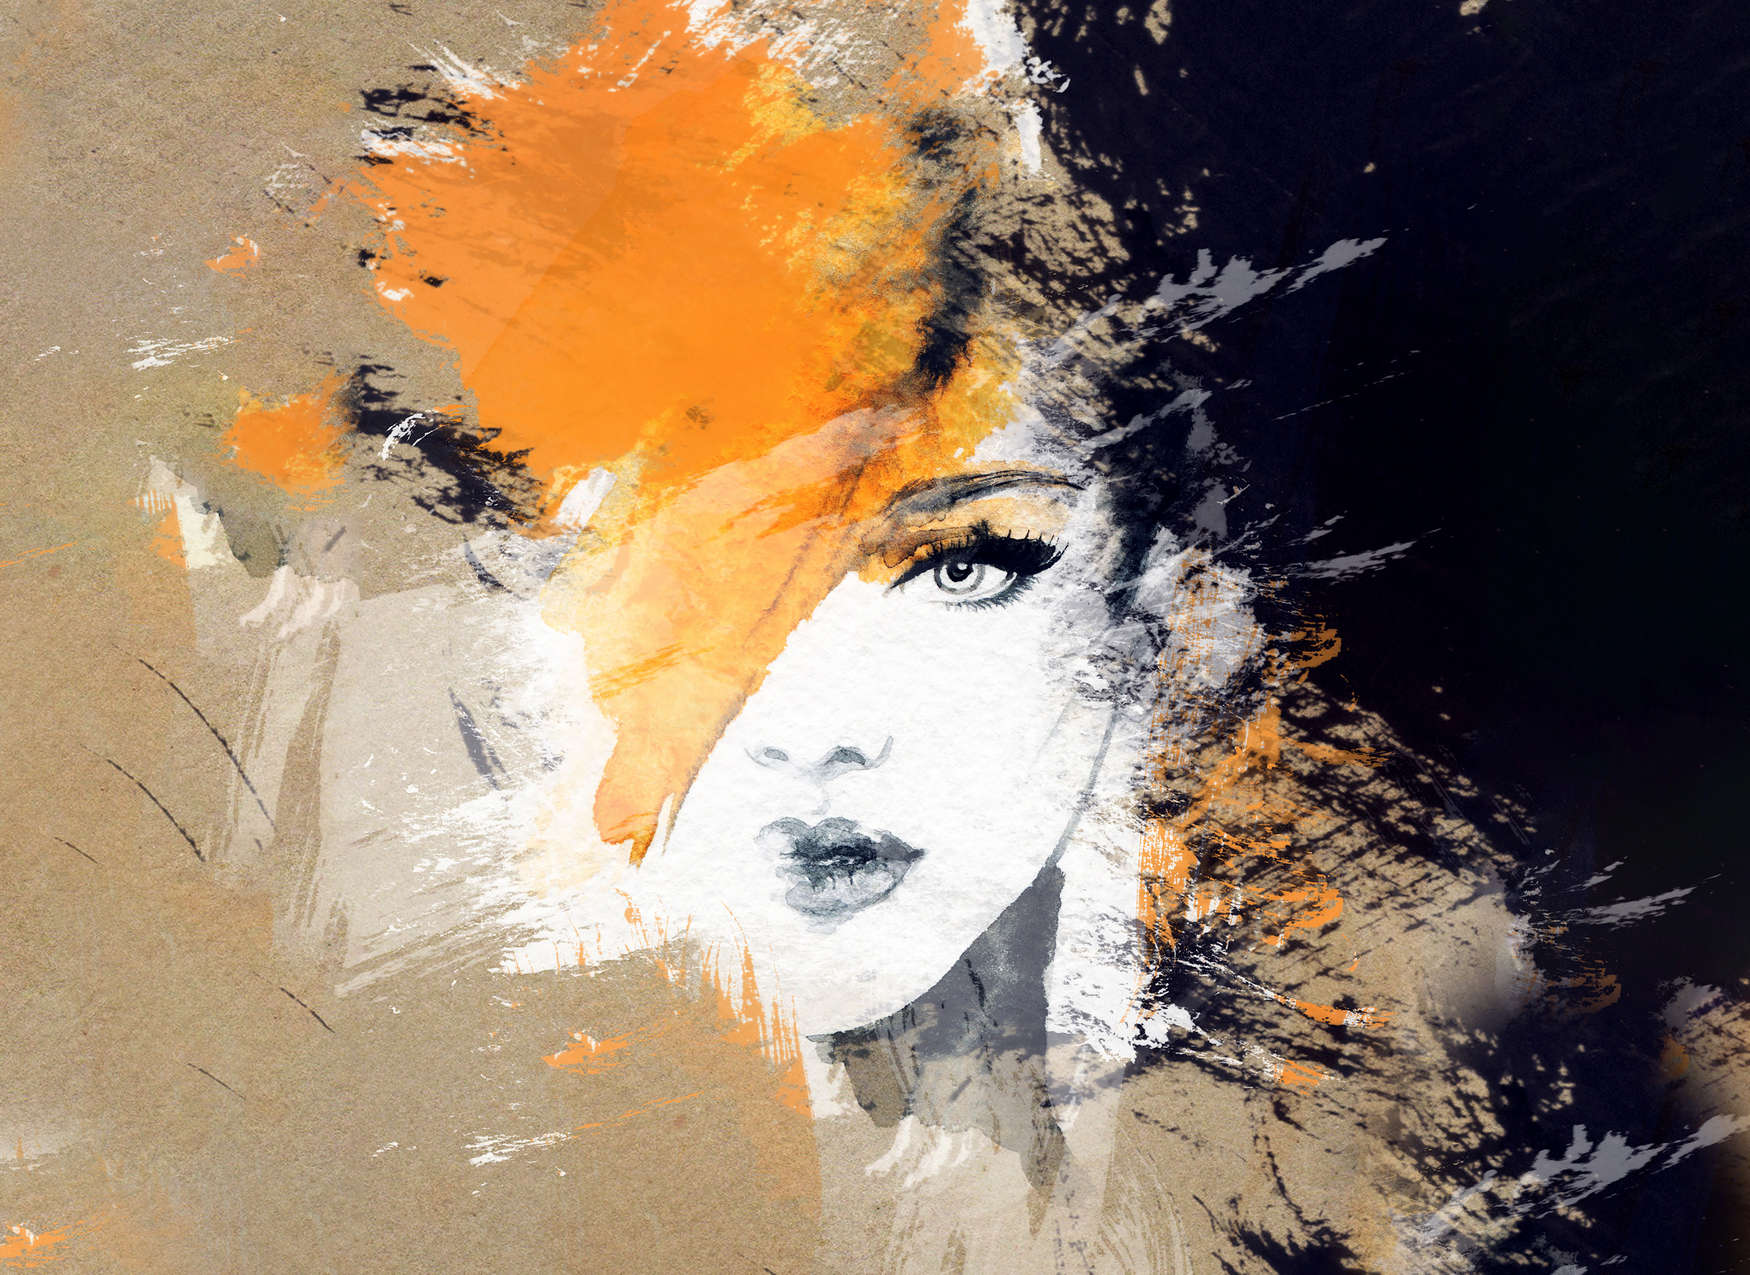             Photo wallpaper with abstract drawing of a woman - Beige, Orange, Black
        